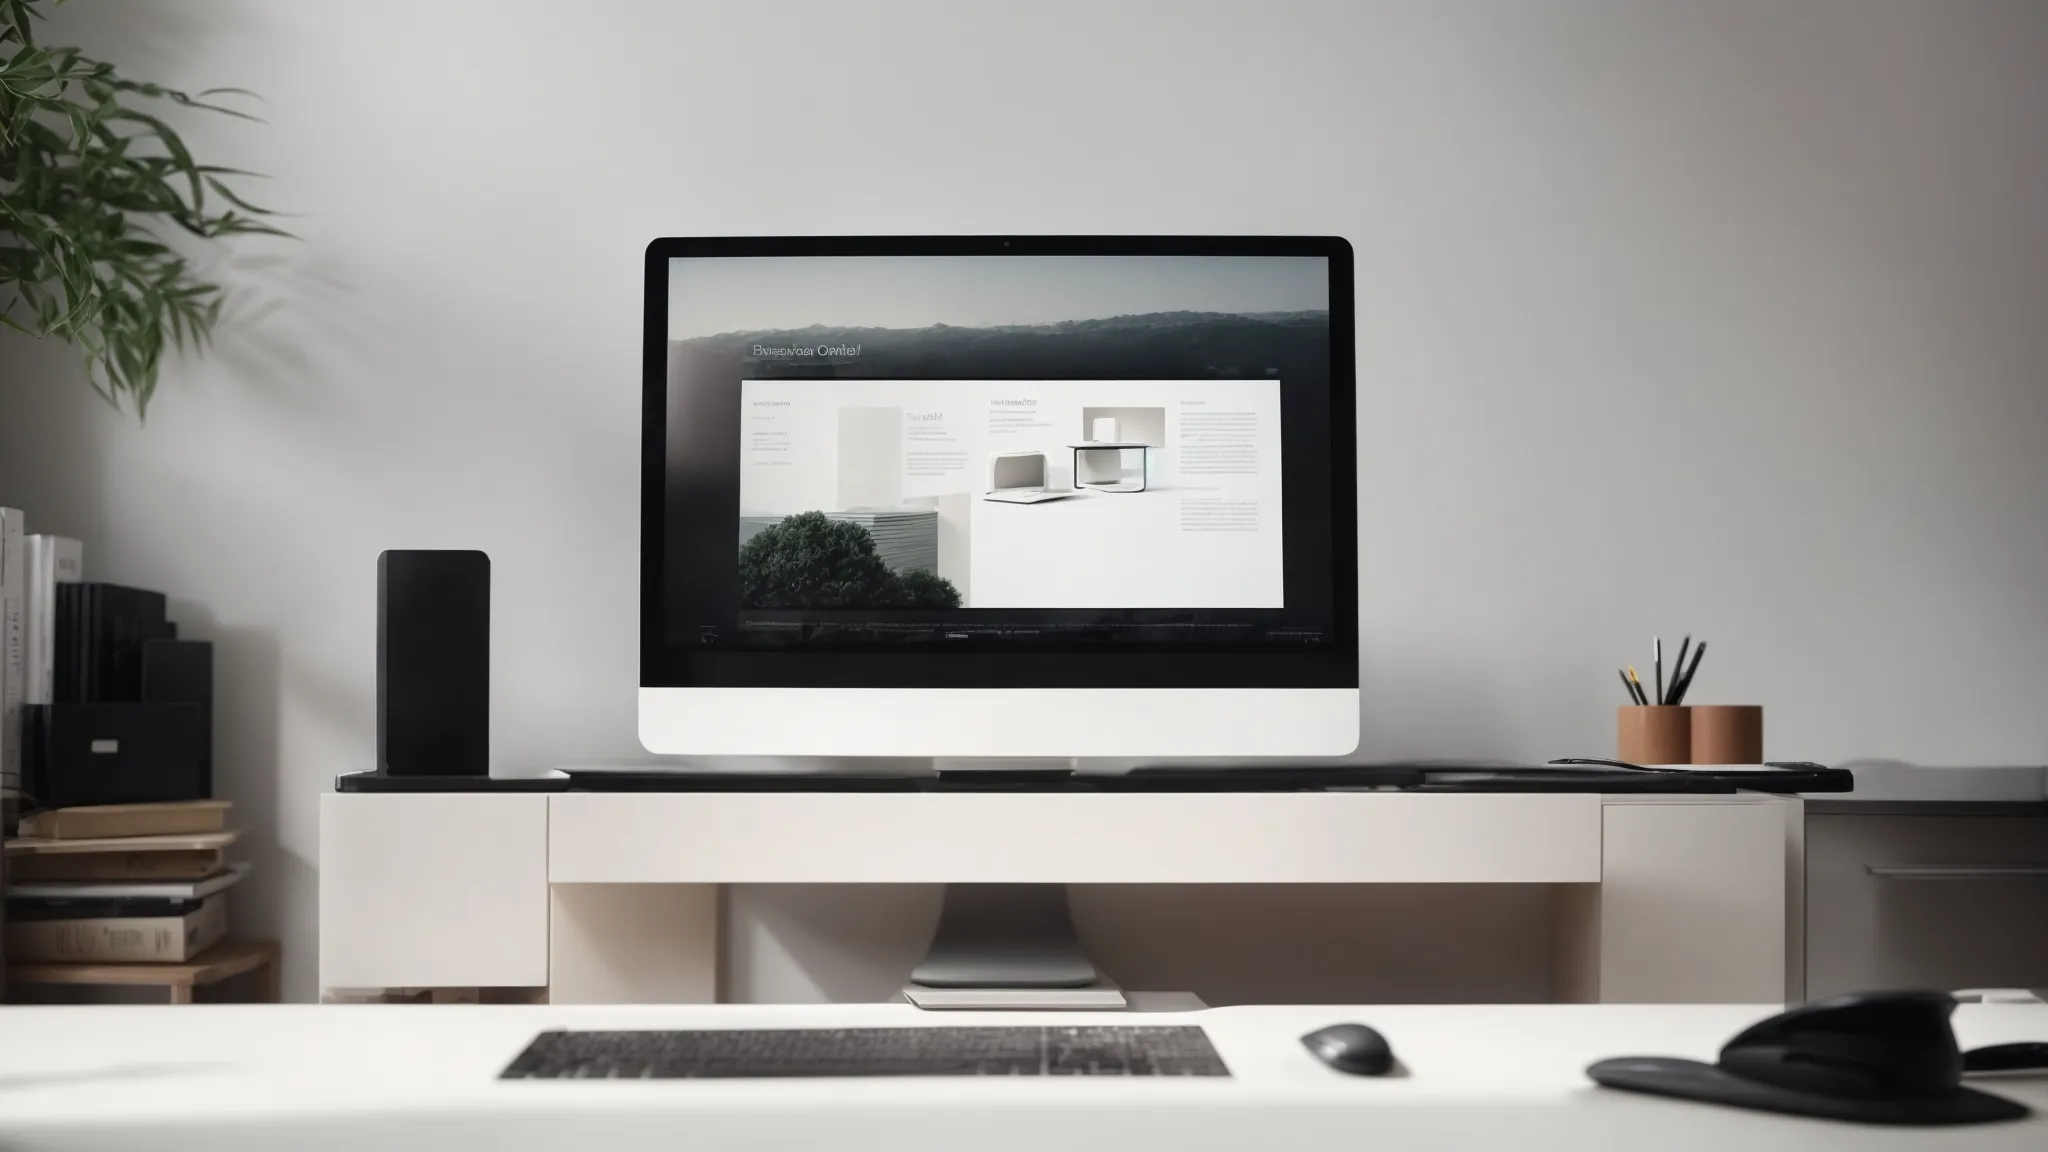 a sleek, minimalist office setup with a clean computer screen displaying a magnifying glass over a webpage layout.